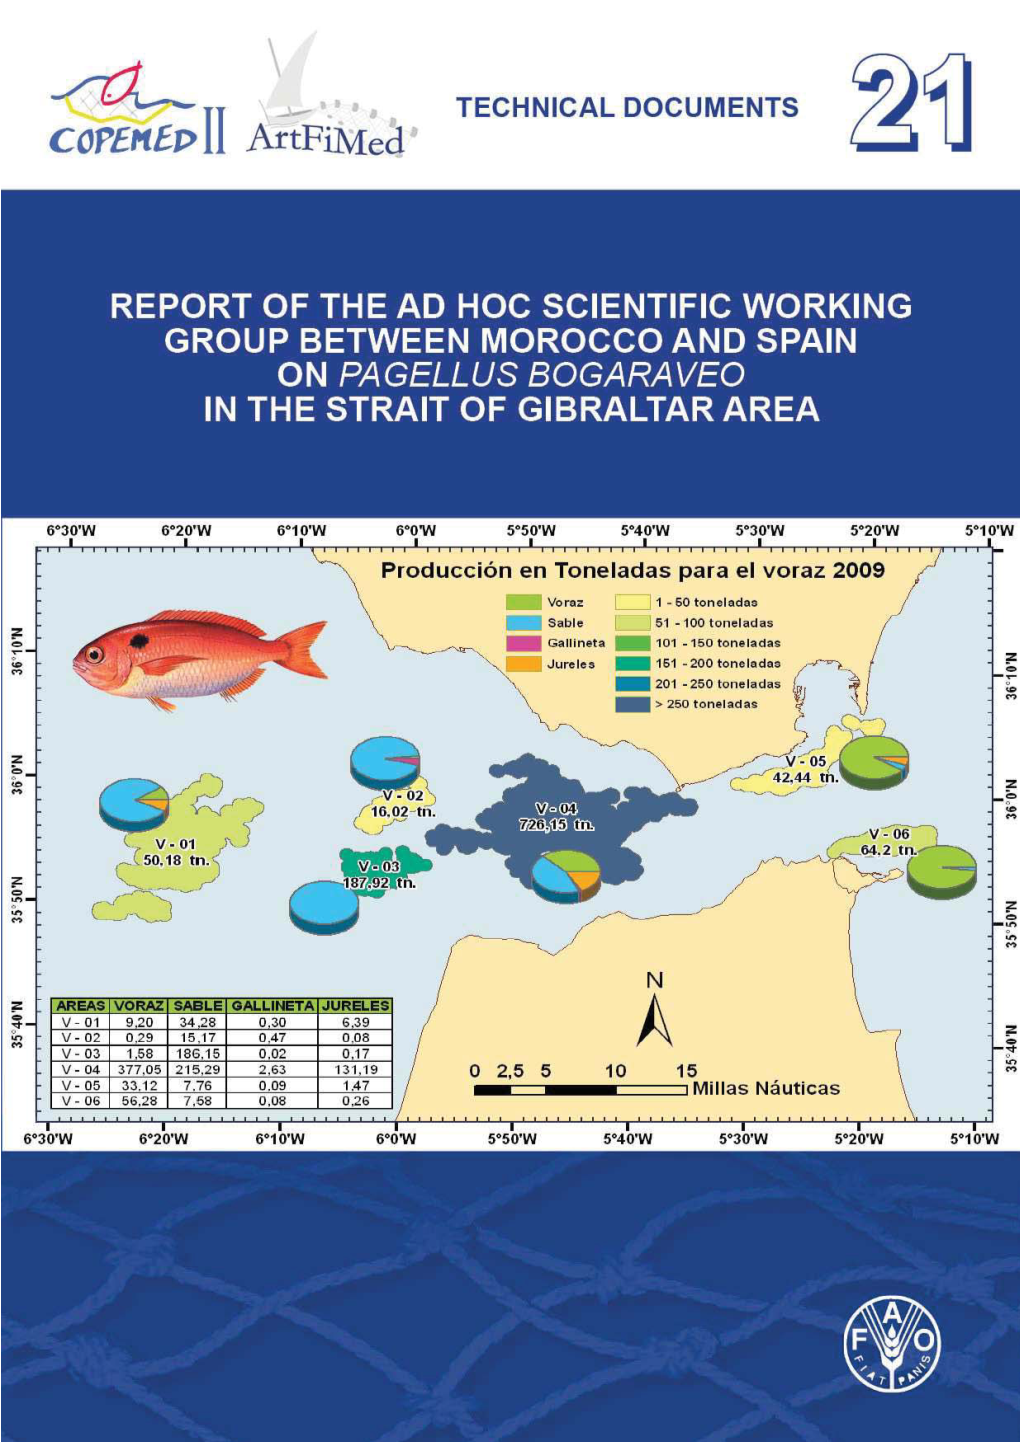 REPORT of the AD HOC SCIENTIFIC WORKING GROUP BETWEEN MOROCCO and SPAIN on Pagellus Bogaraveo in the STRAIT of GIBRALTAR AREA